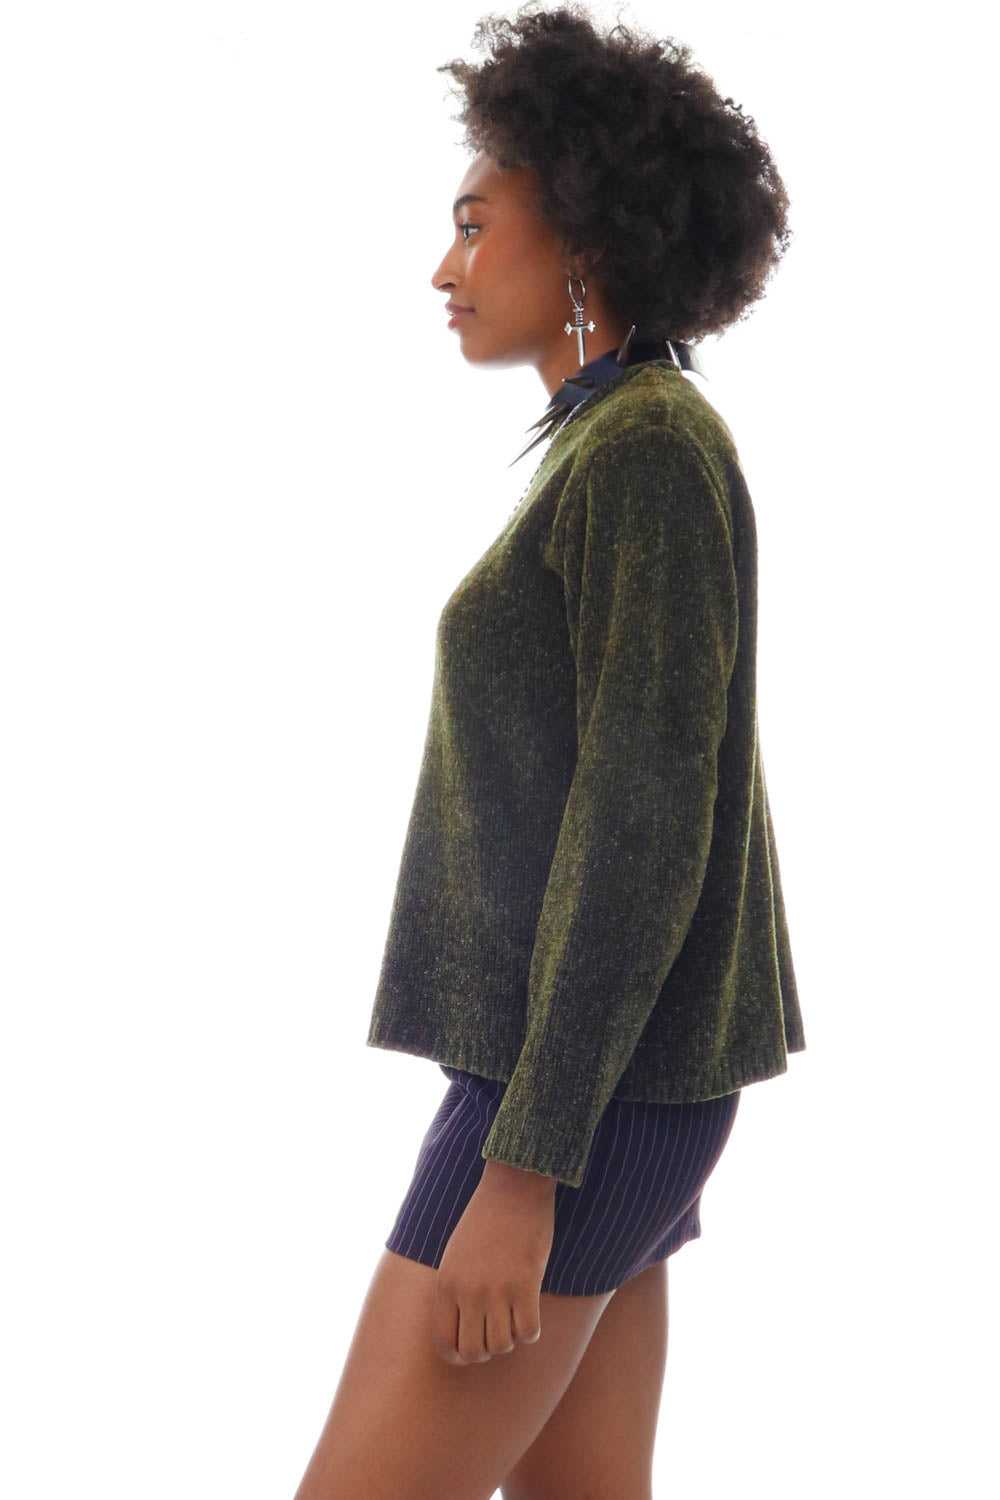 Vintage 90's Fuzzy Green Sweater - S/M - image 4